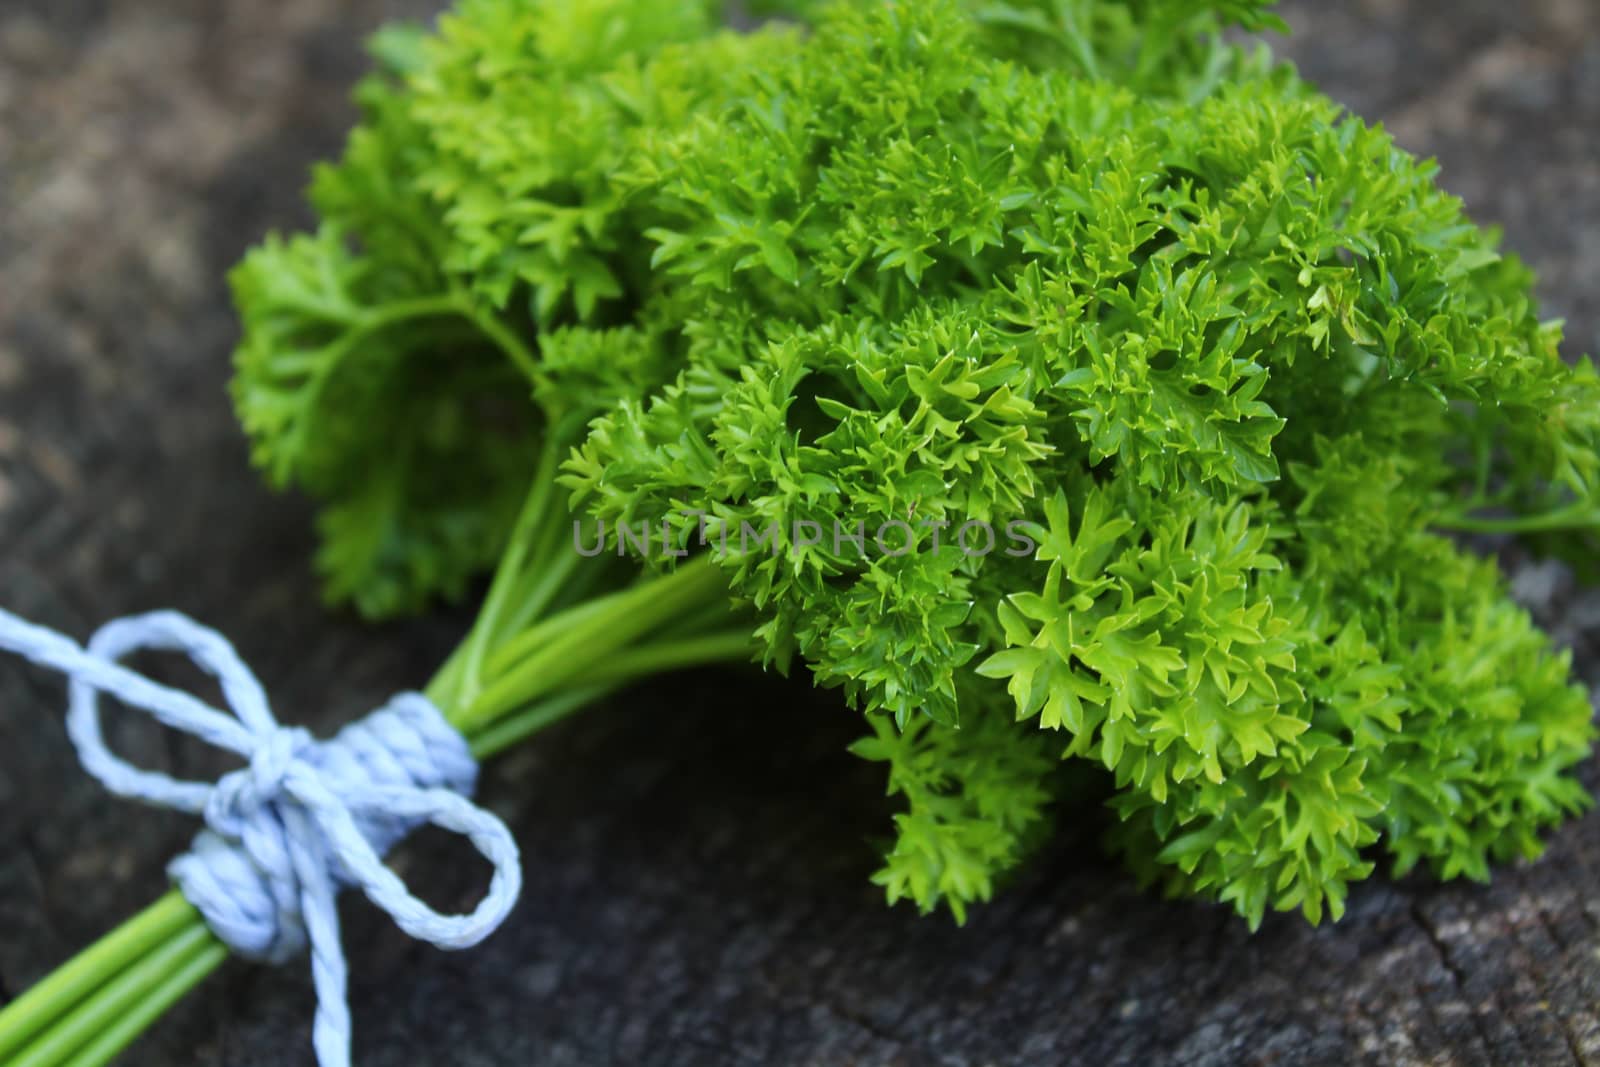 The picture shows bunch of parsley on an old weathered tree trunk